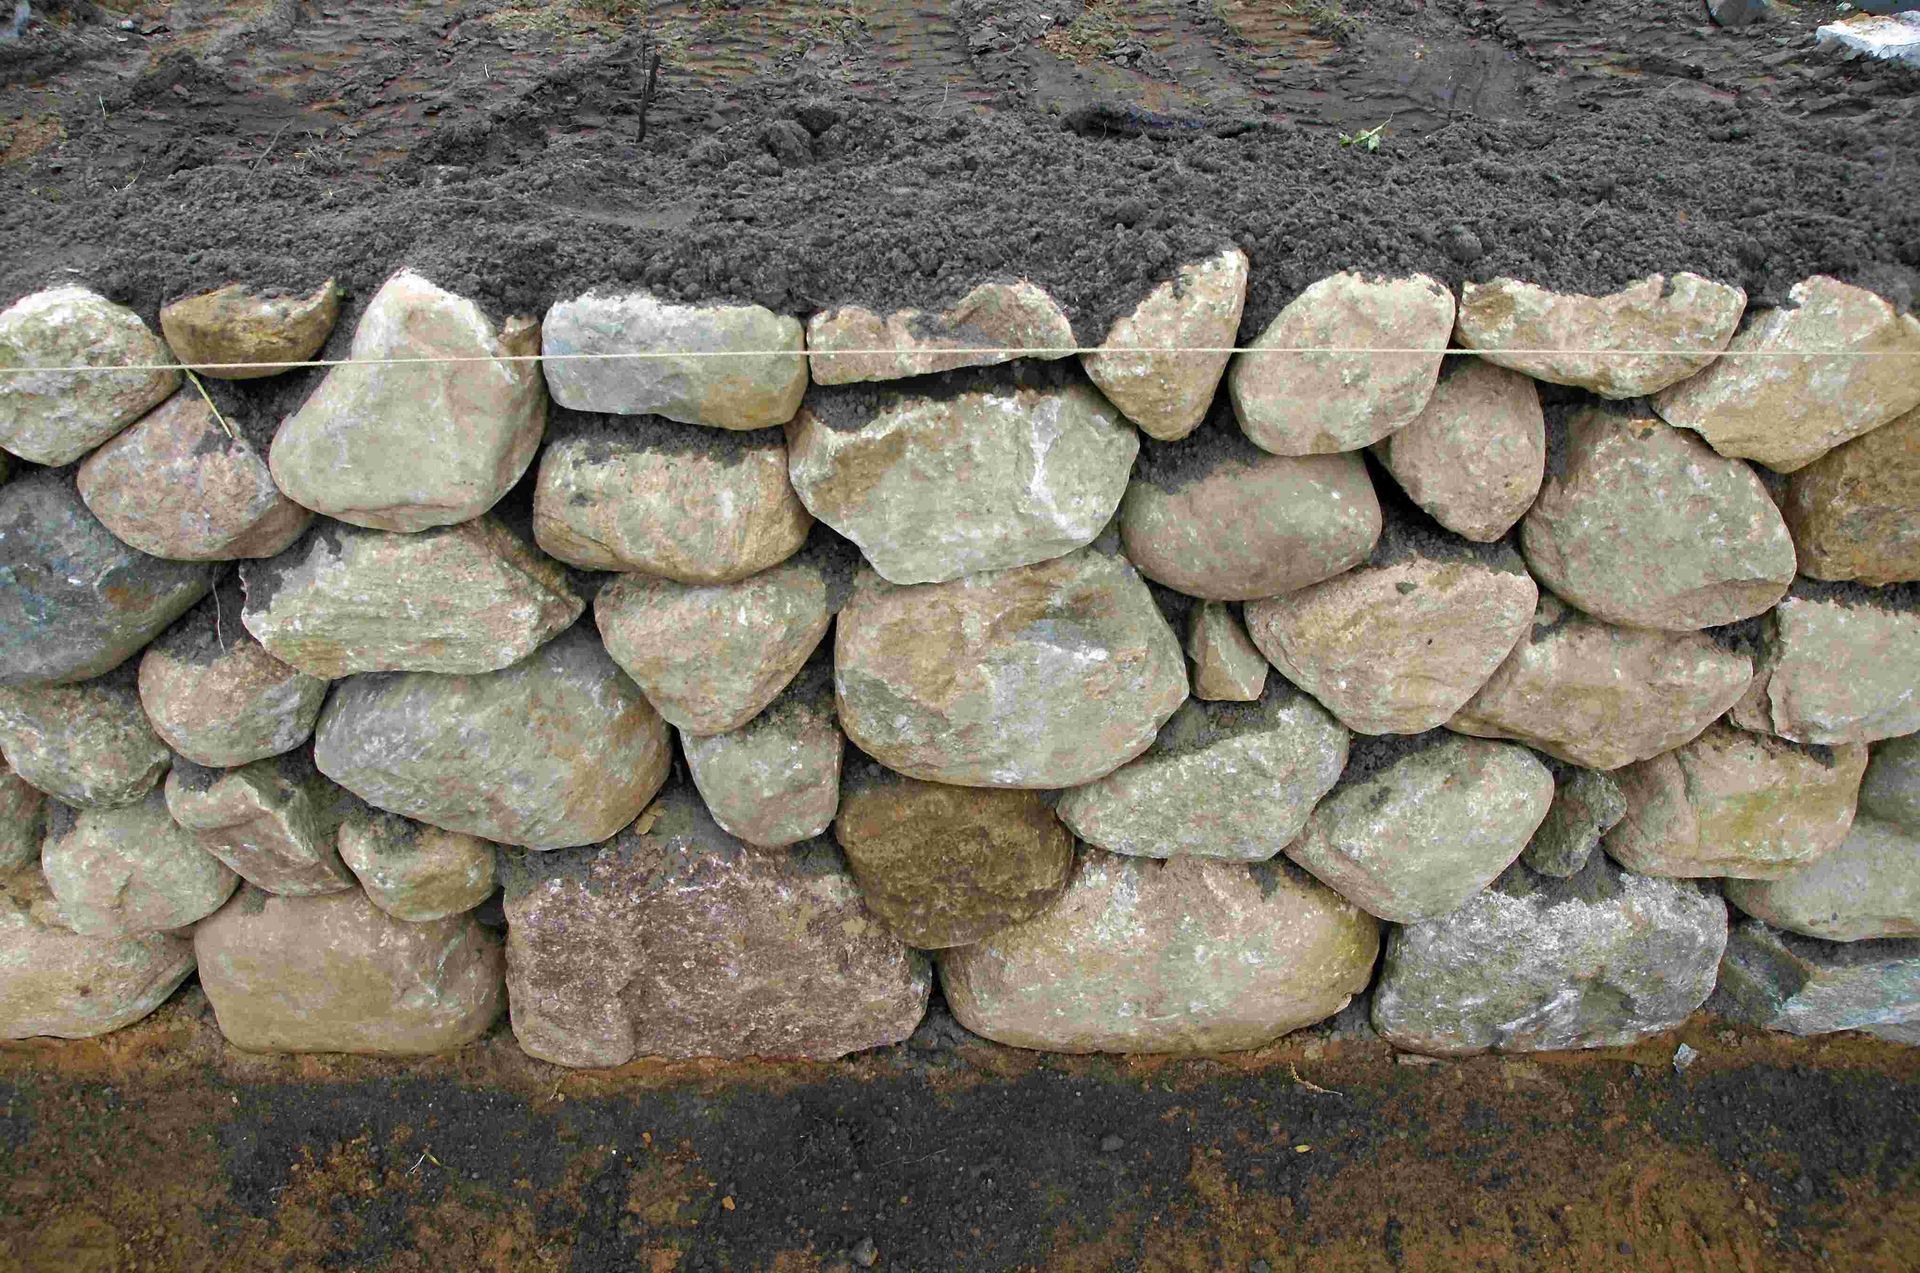 A wall built from large rocks